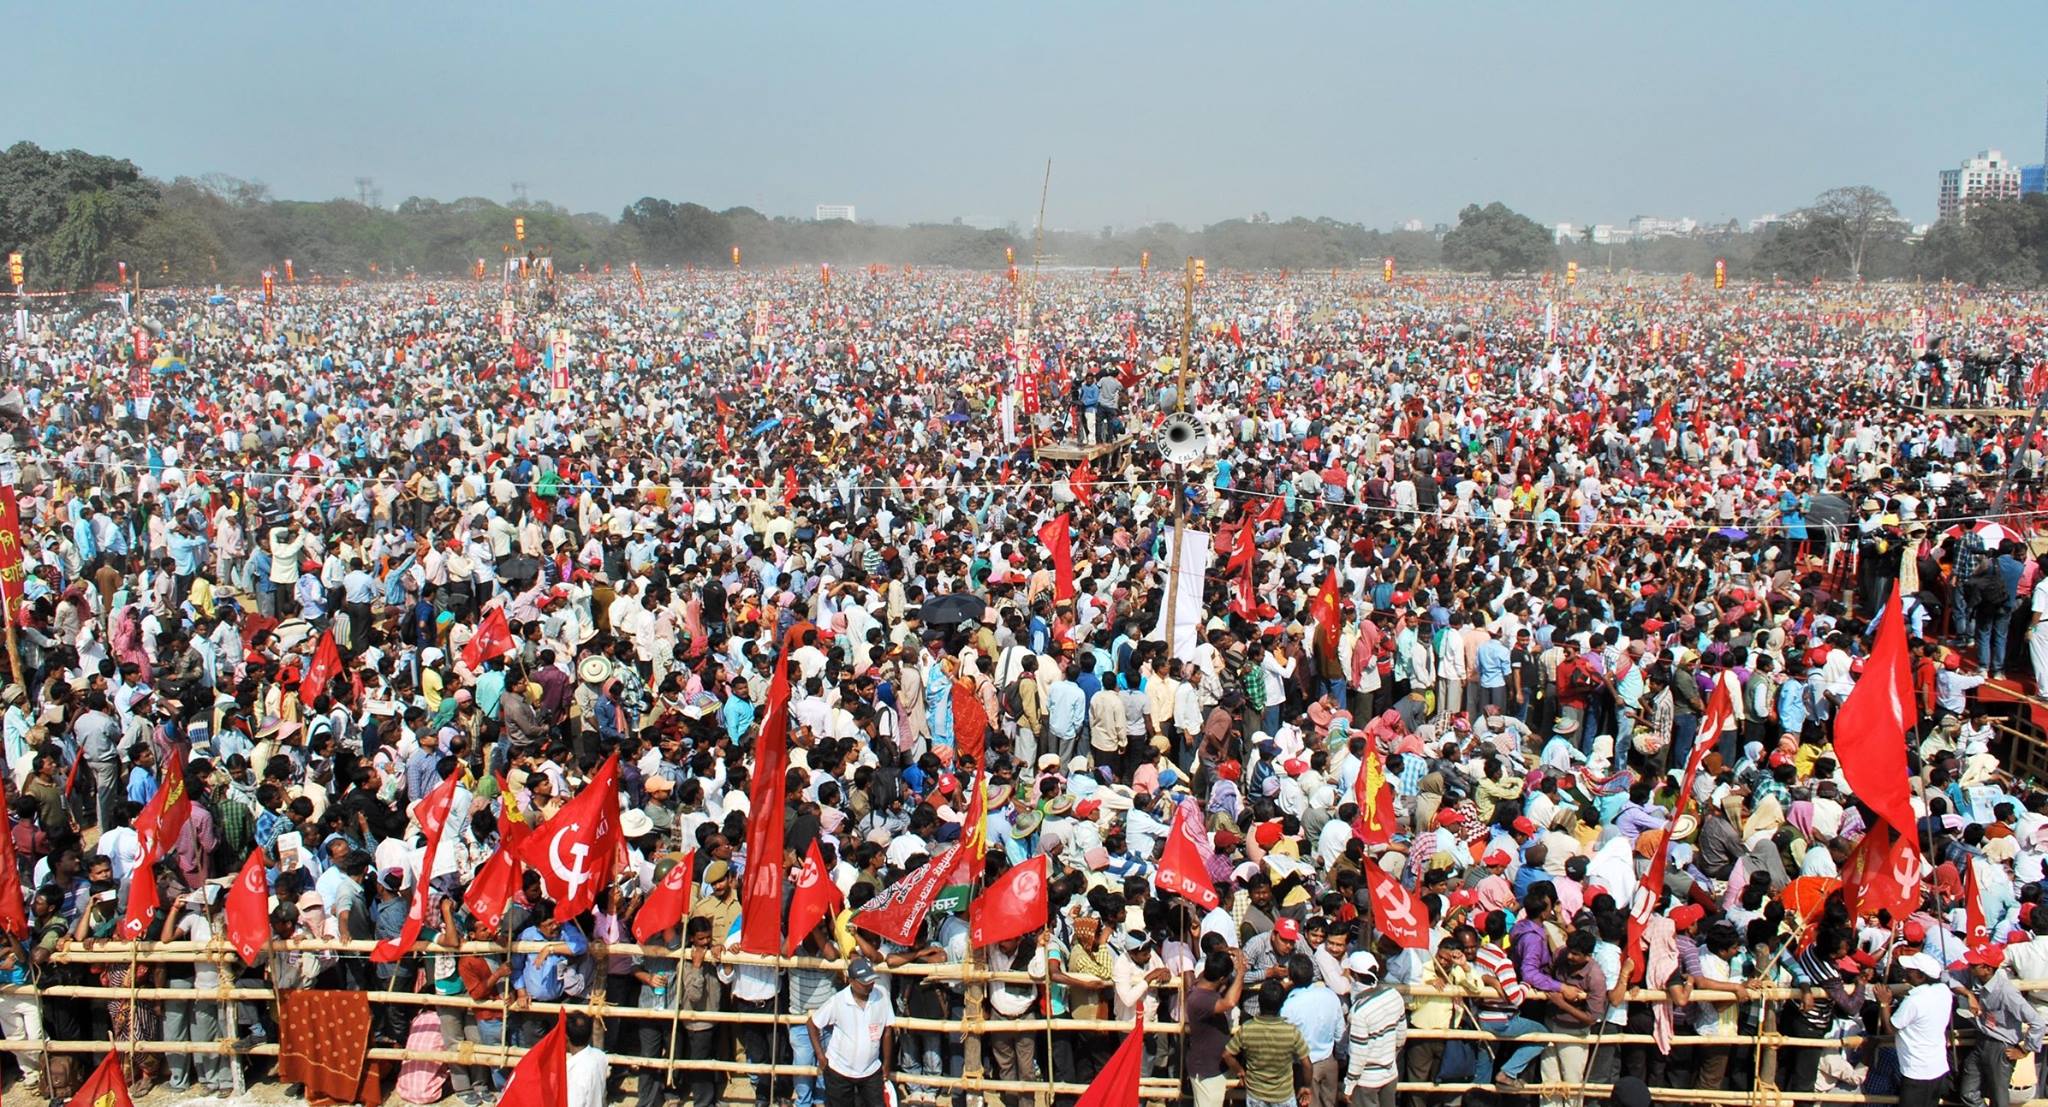 A Left Front rally in Kolkata's famous Brigade Ground which had more than 10 Lakh people attending it.